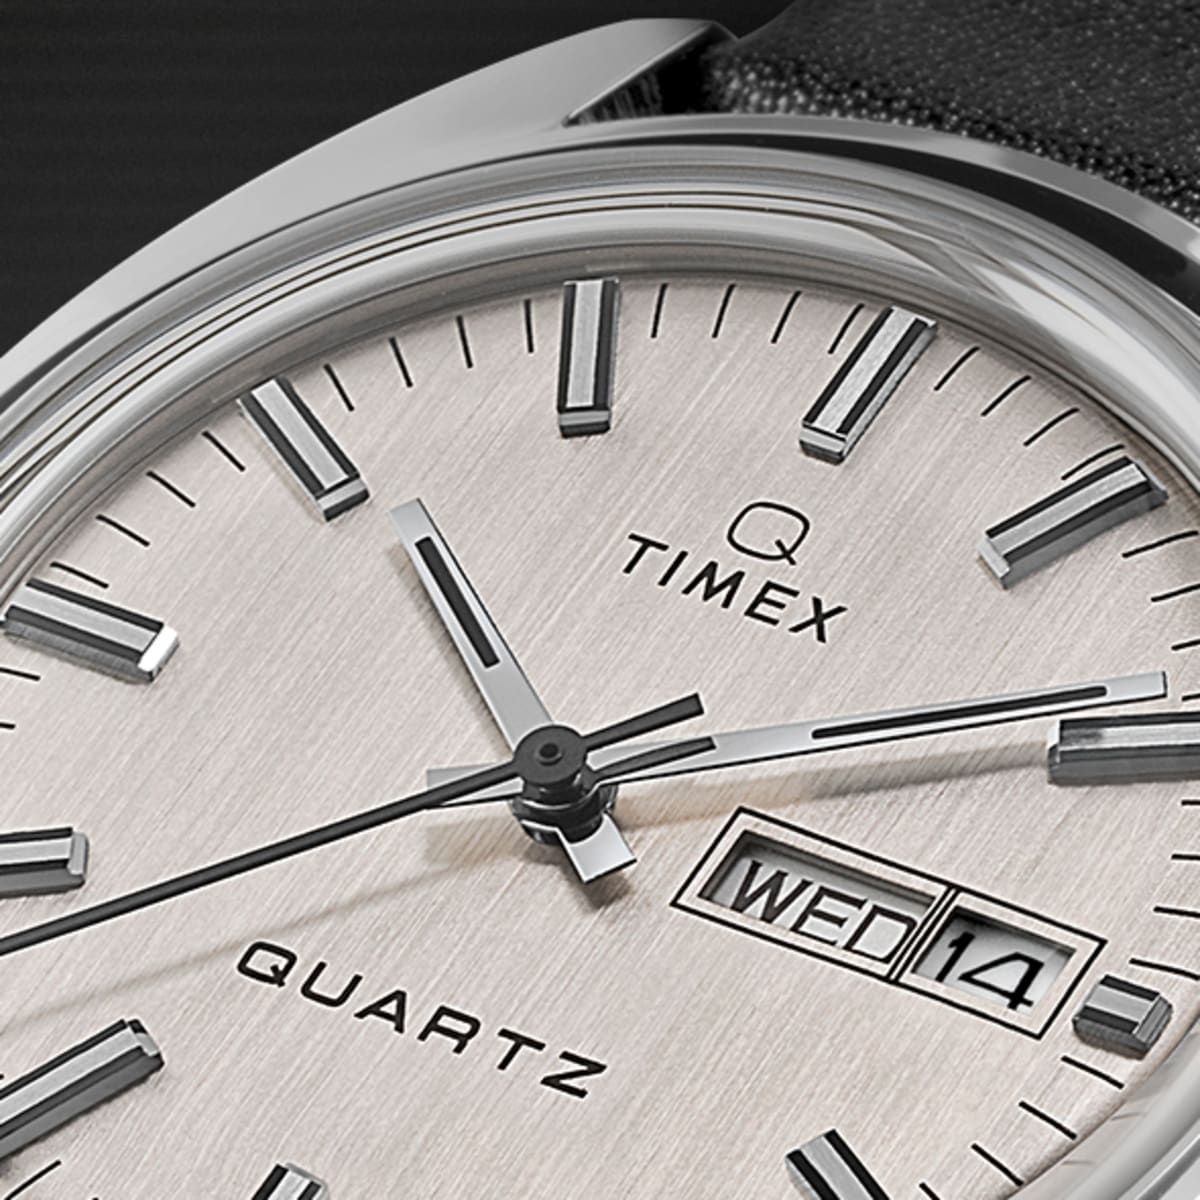 Timex continues to explore the 70s with its Q Timex 1978 Ressiue - Acquire